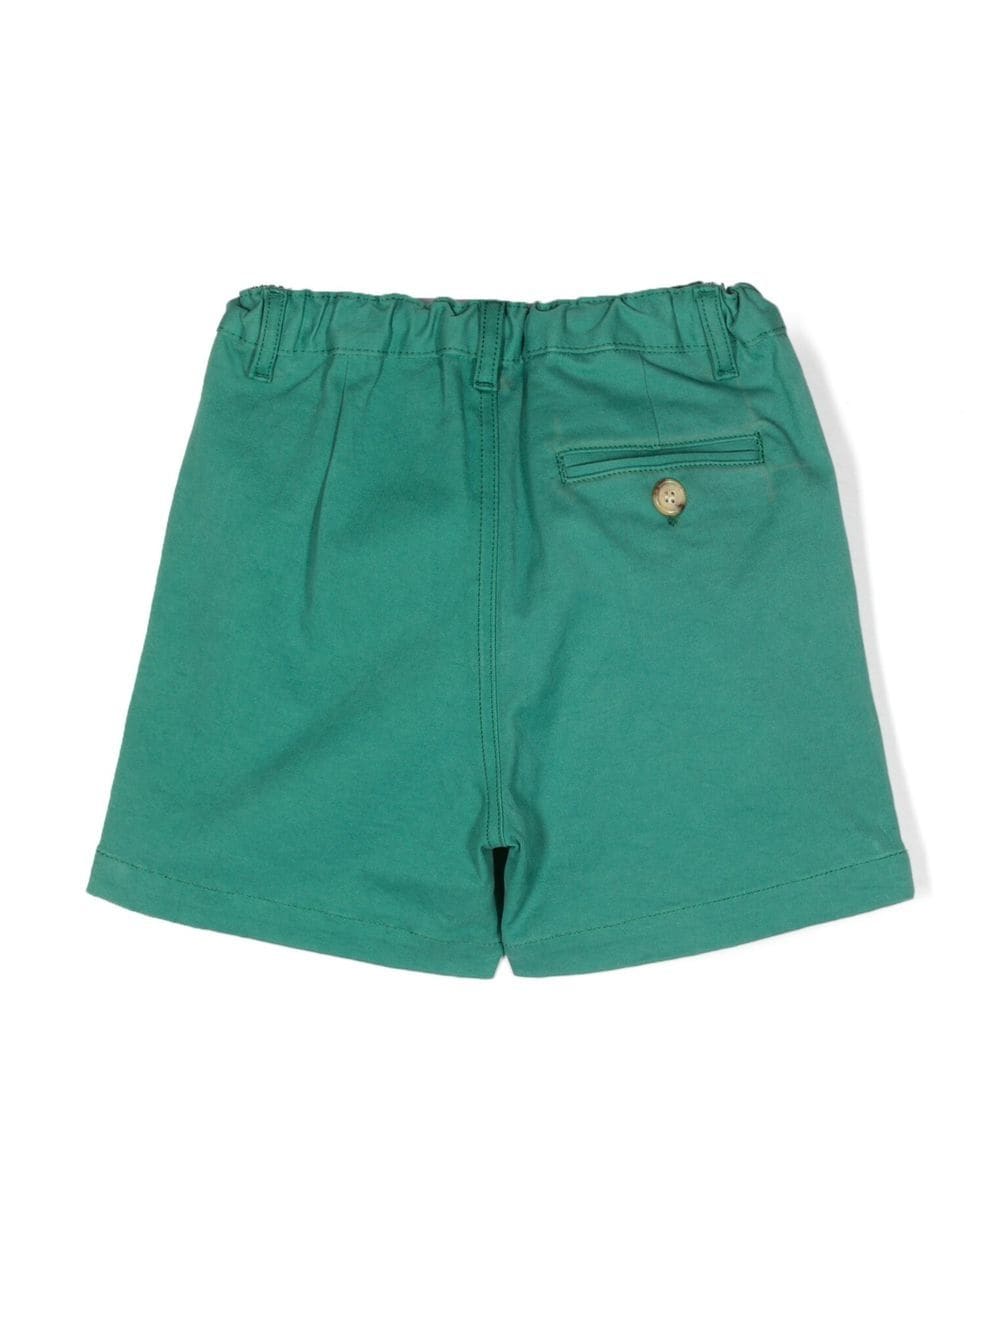 Bonpoint Charles tailored shorts - Groen